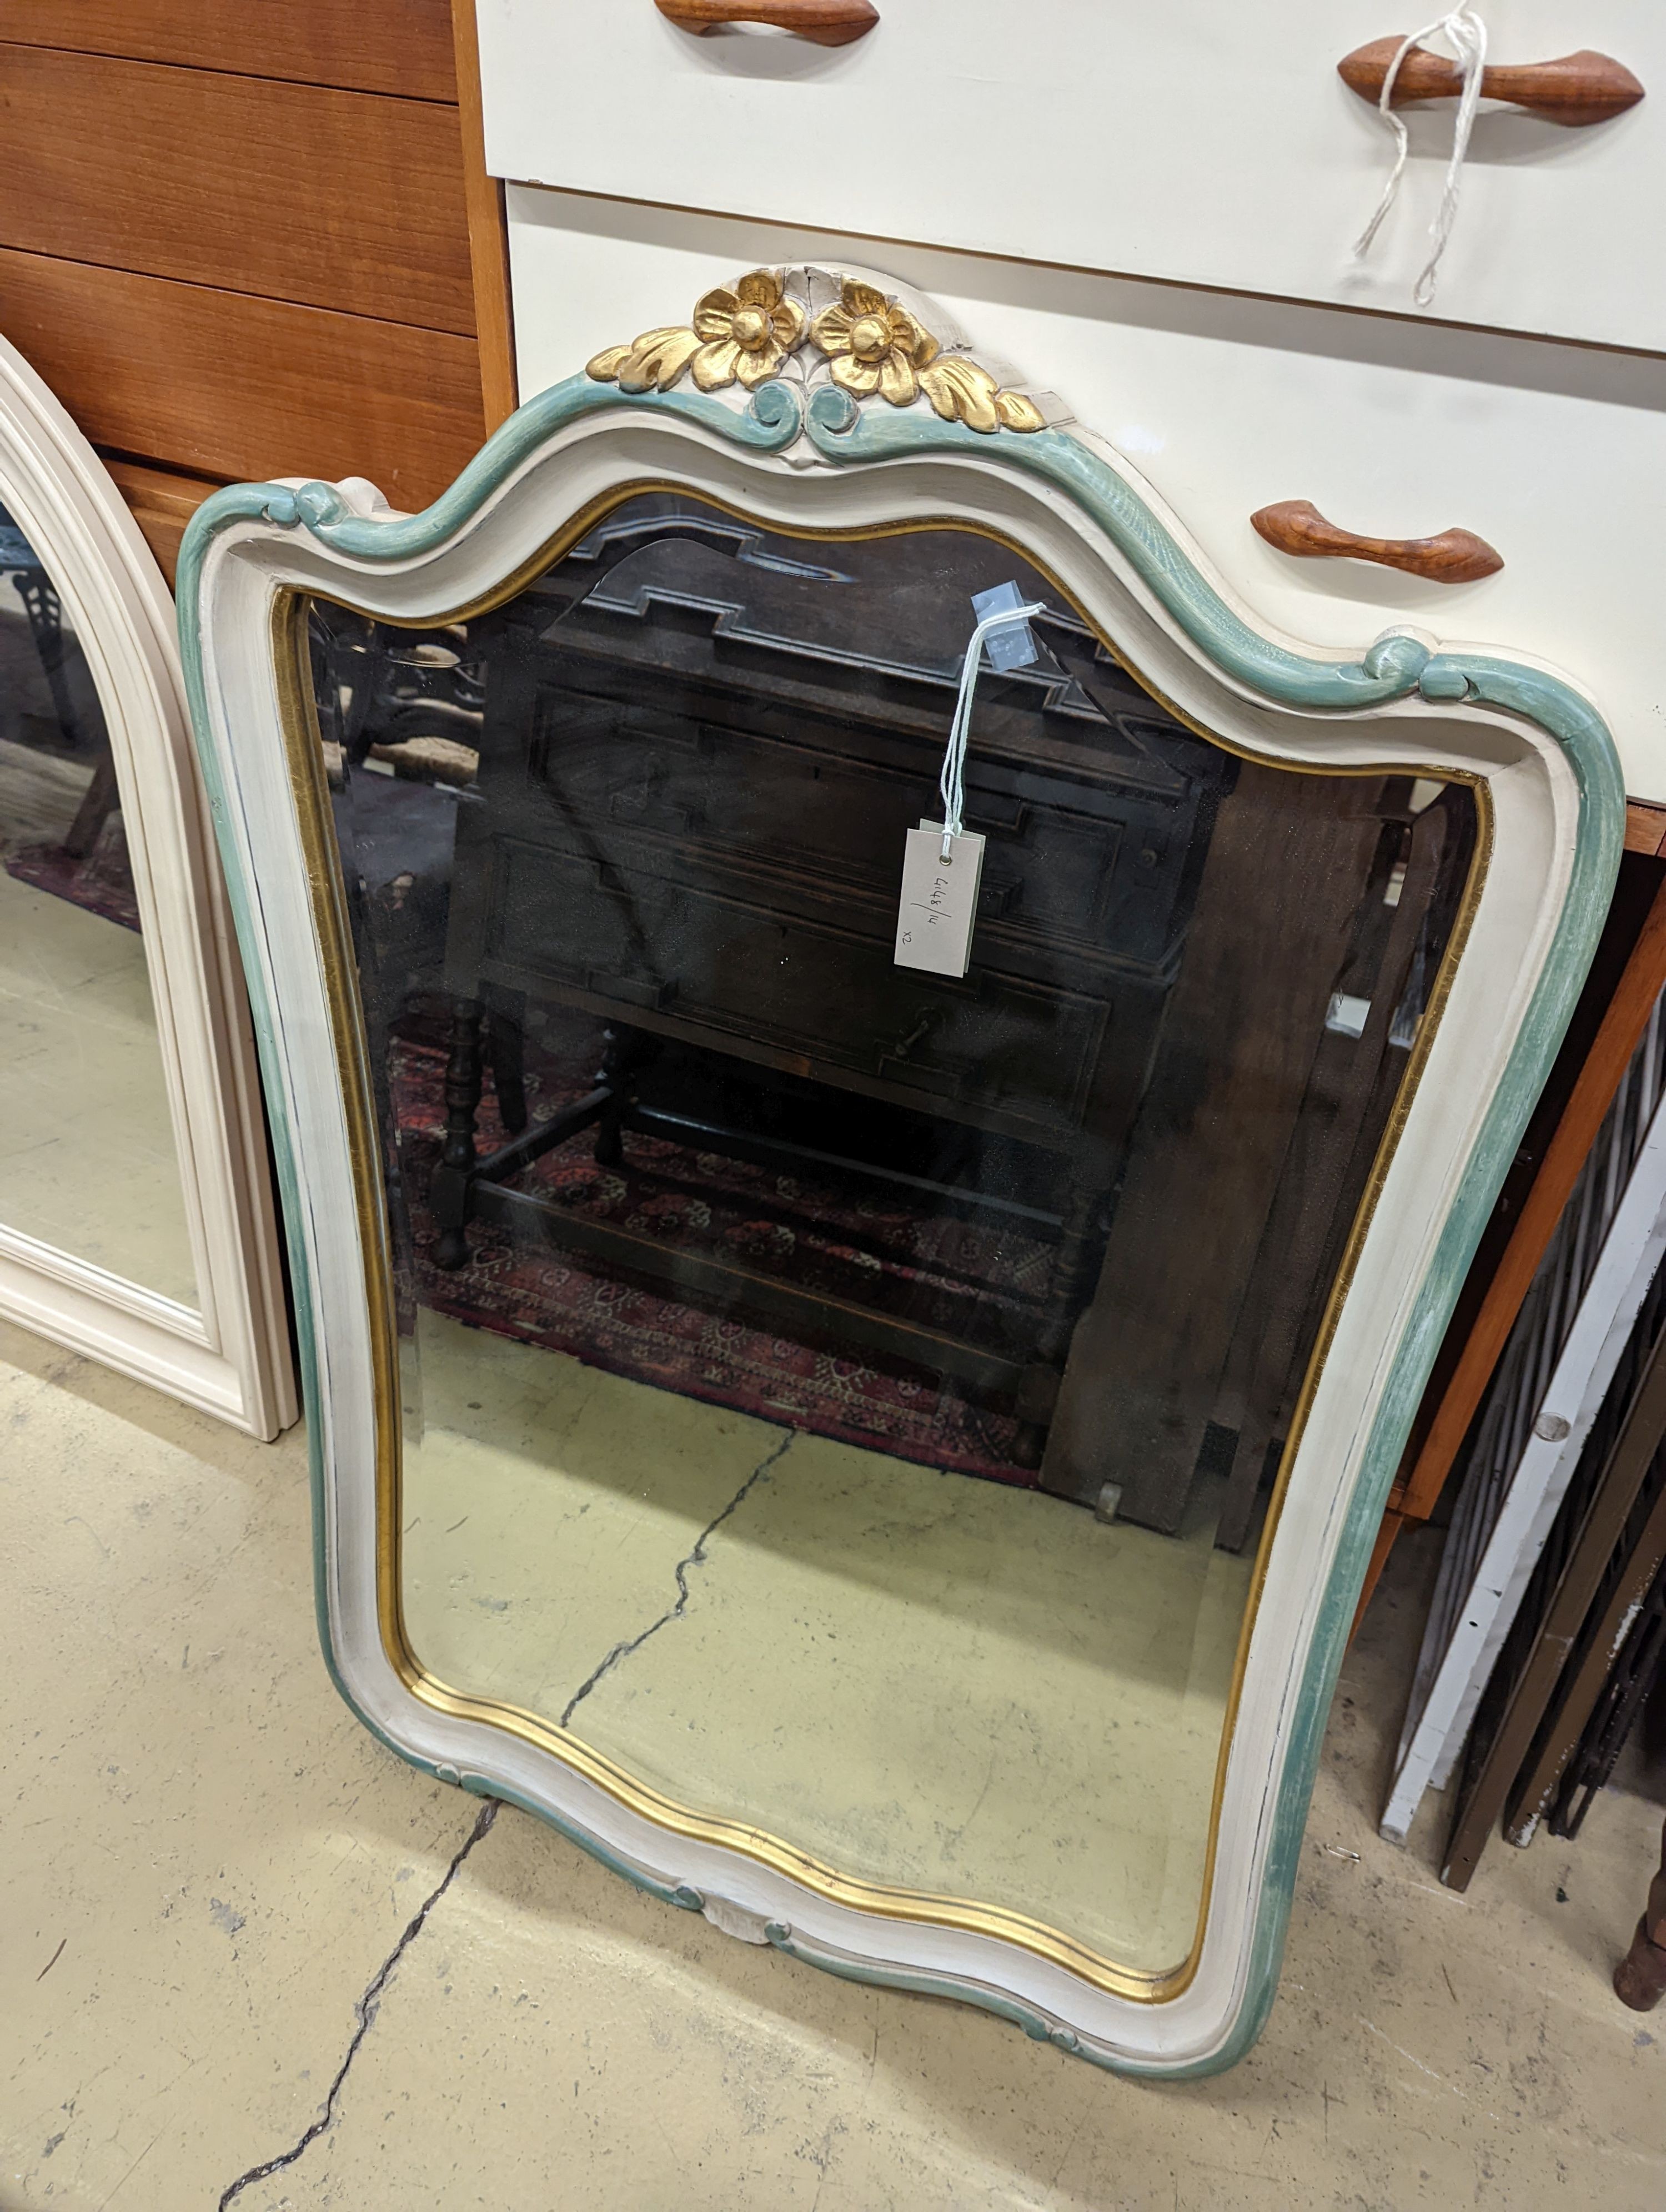 Two modern cream painted wall mirrors, larger width 69cm, height 106cm